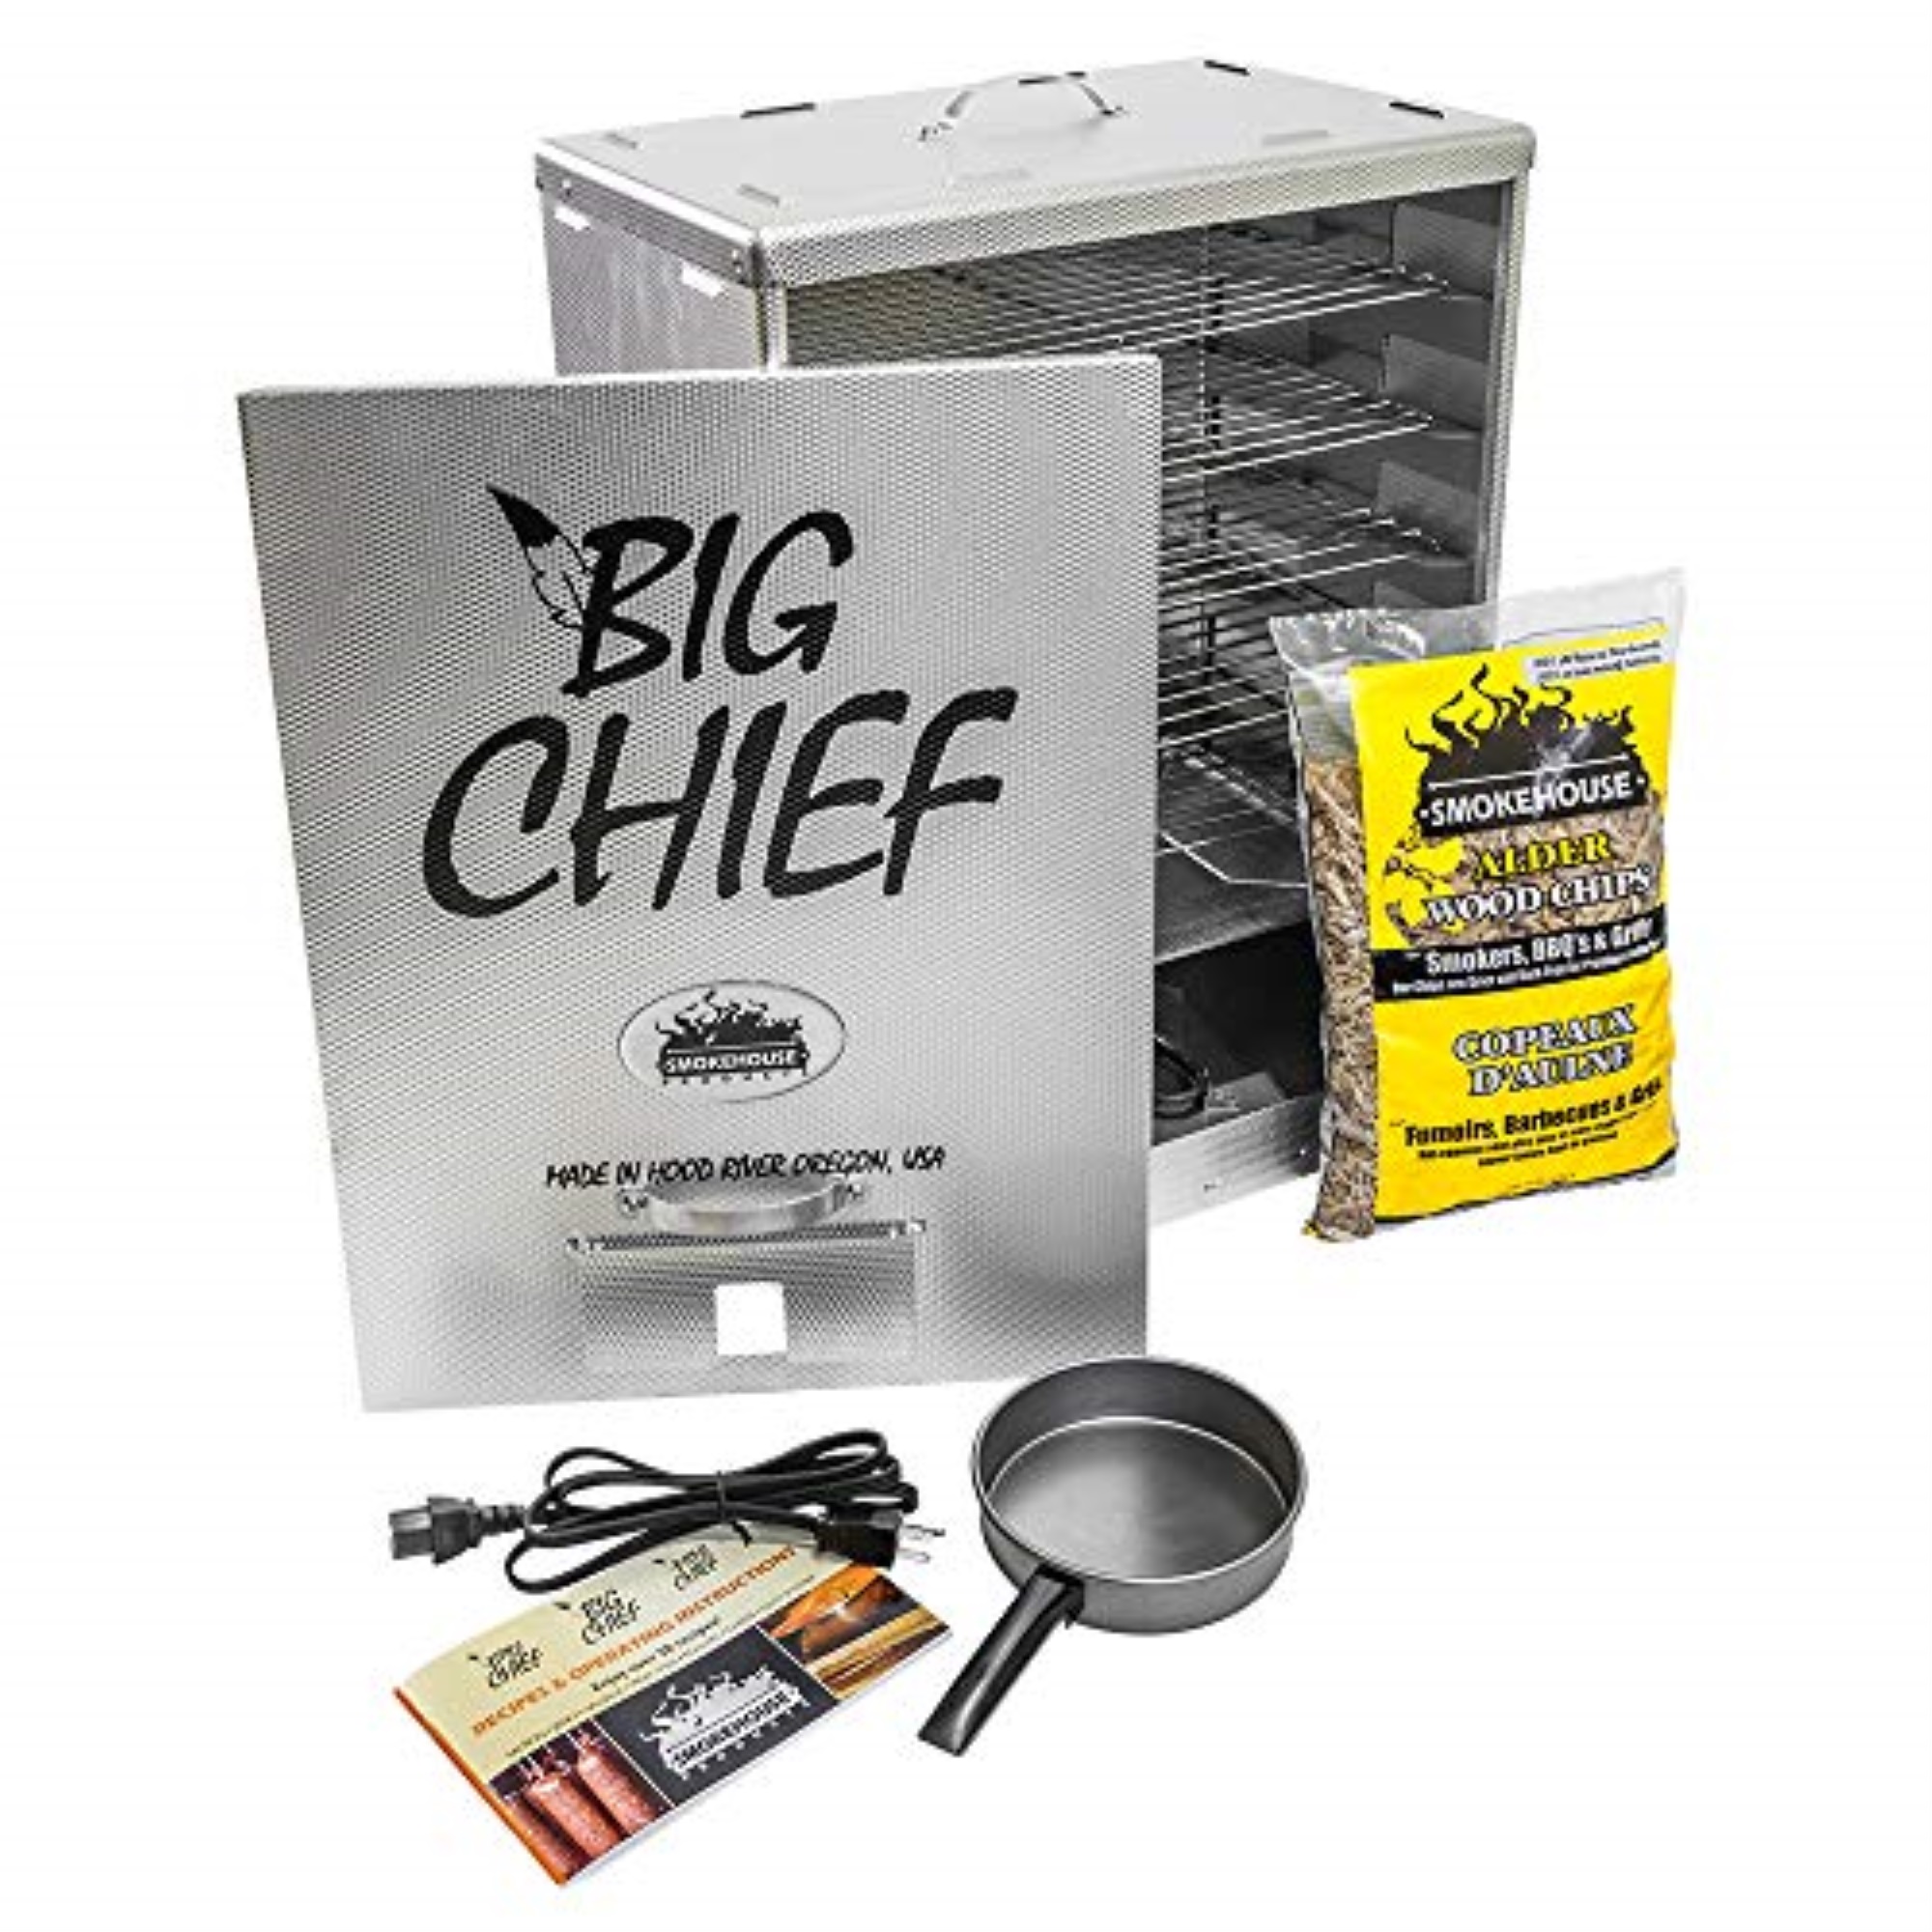 Smokehouse Big Chief Front Load Electric Smoker - image 1 of 2